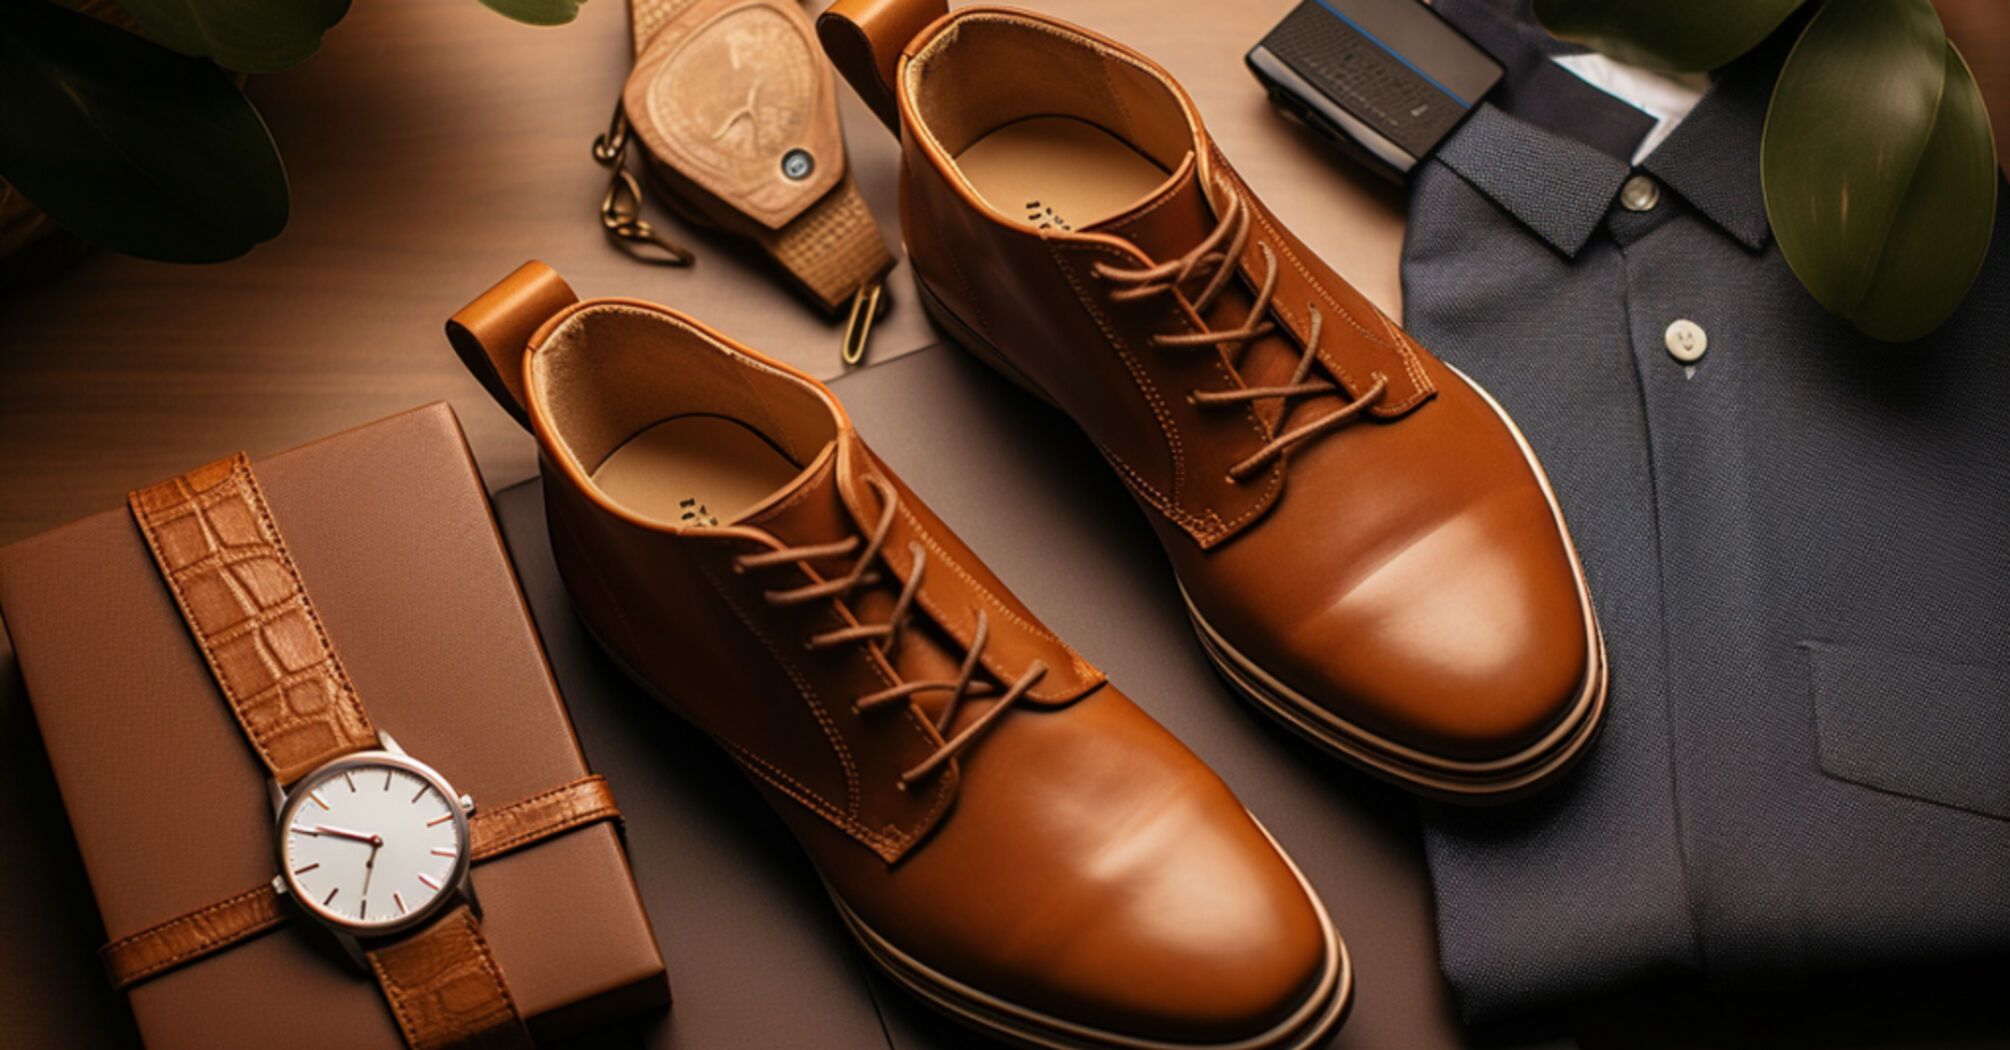 How to restore shine to leather shoes in minutes